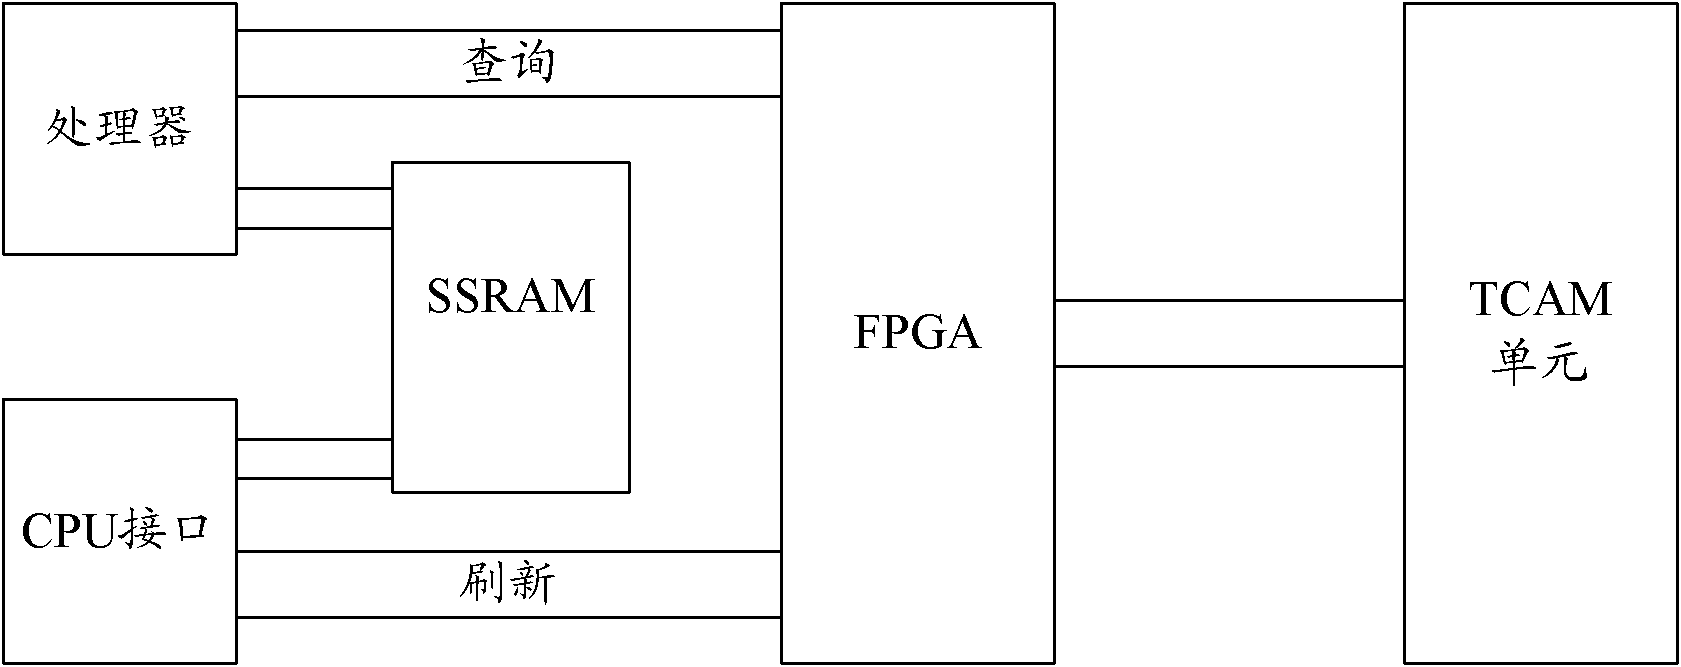 Method and device for dispatching TCAM (telecommunication access method) query and refresh messages